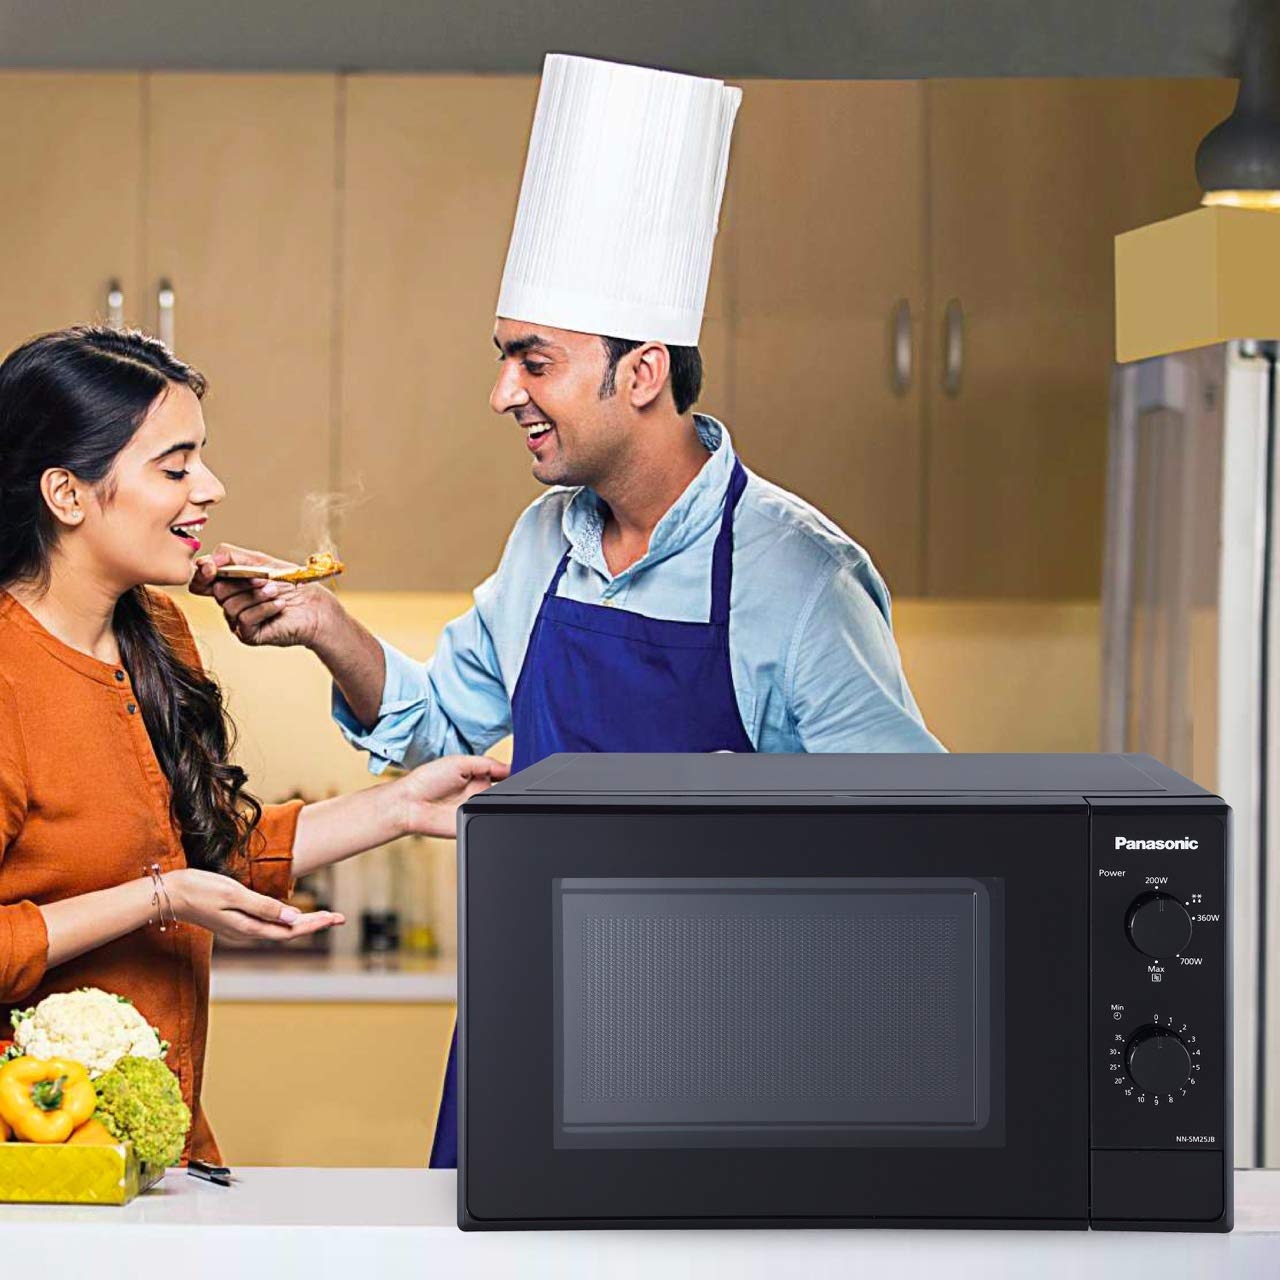 Best Samsung Solo Microwave Ovens In India 2022!